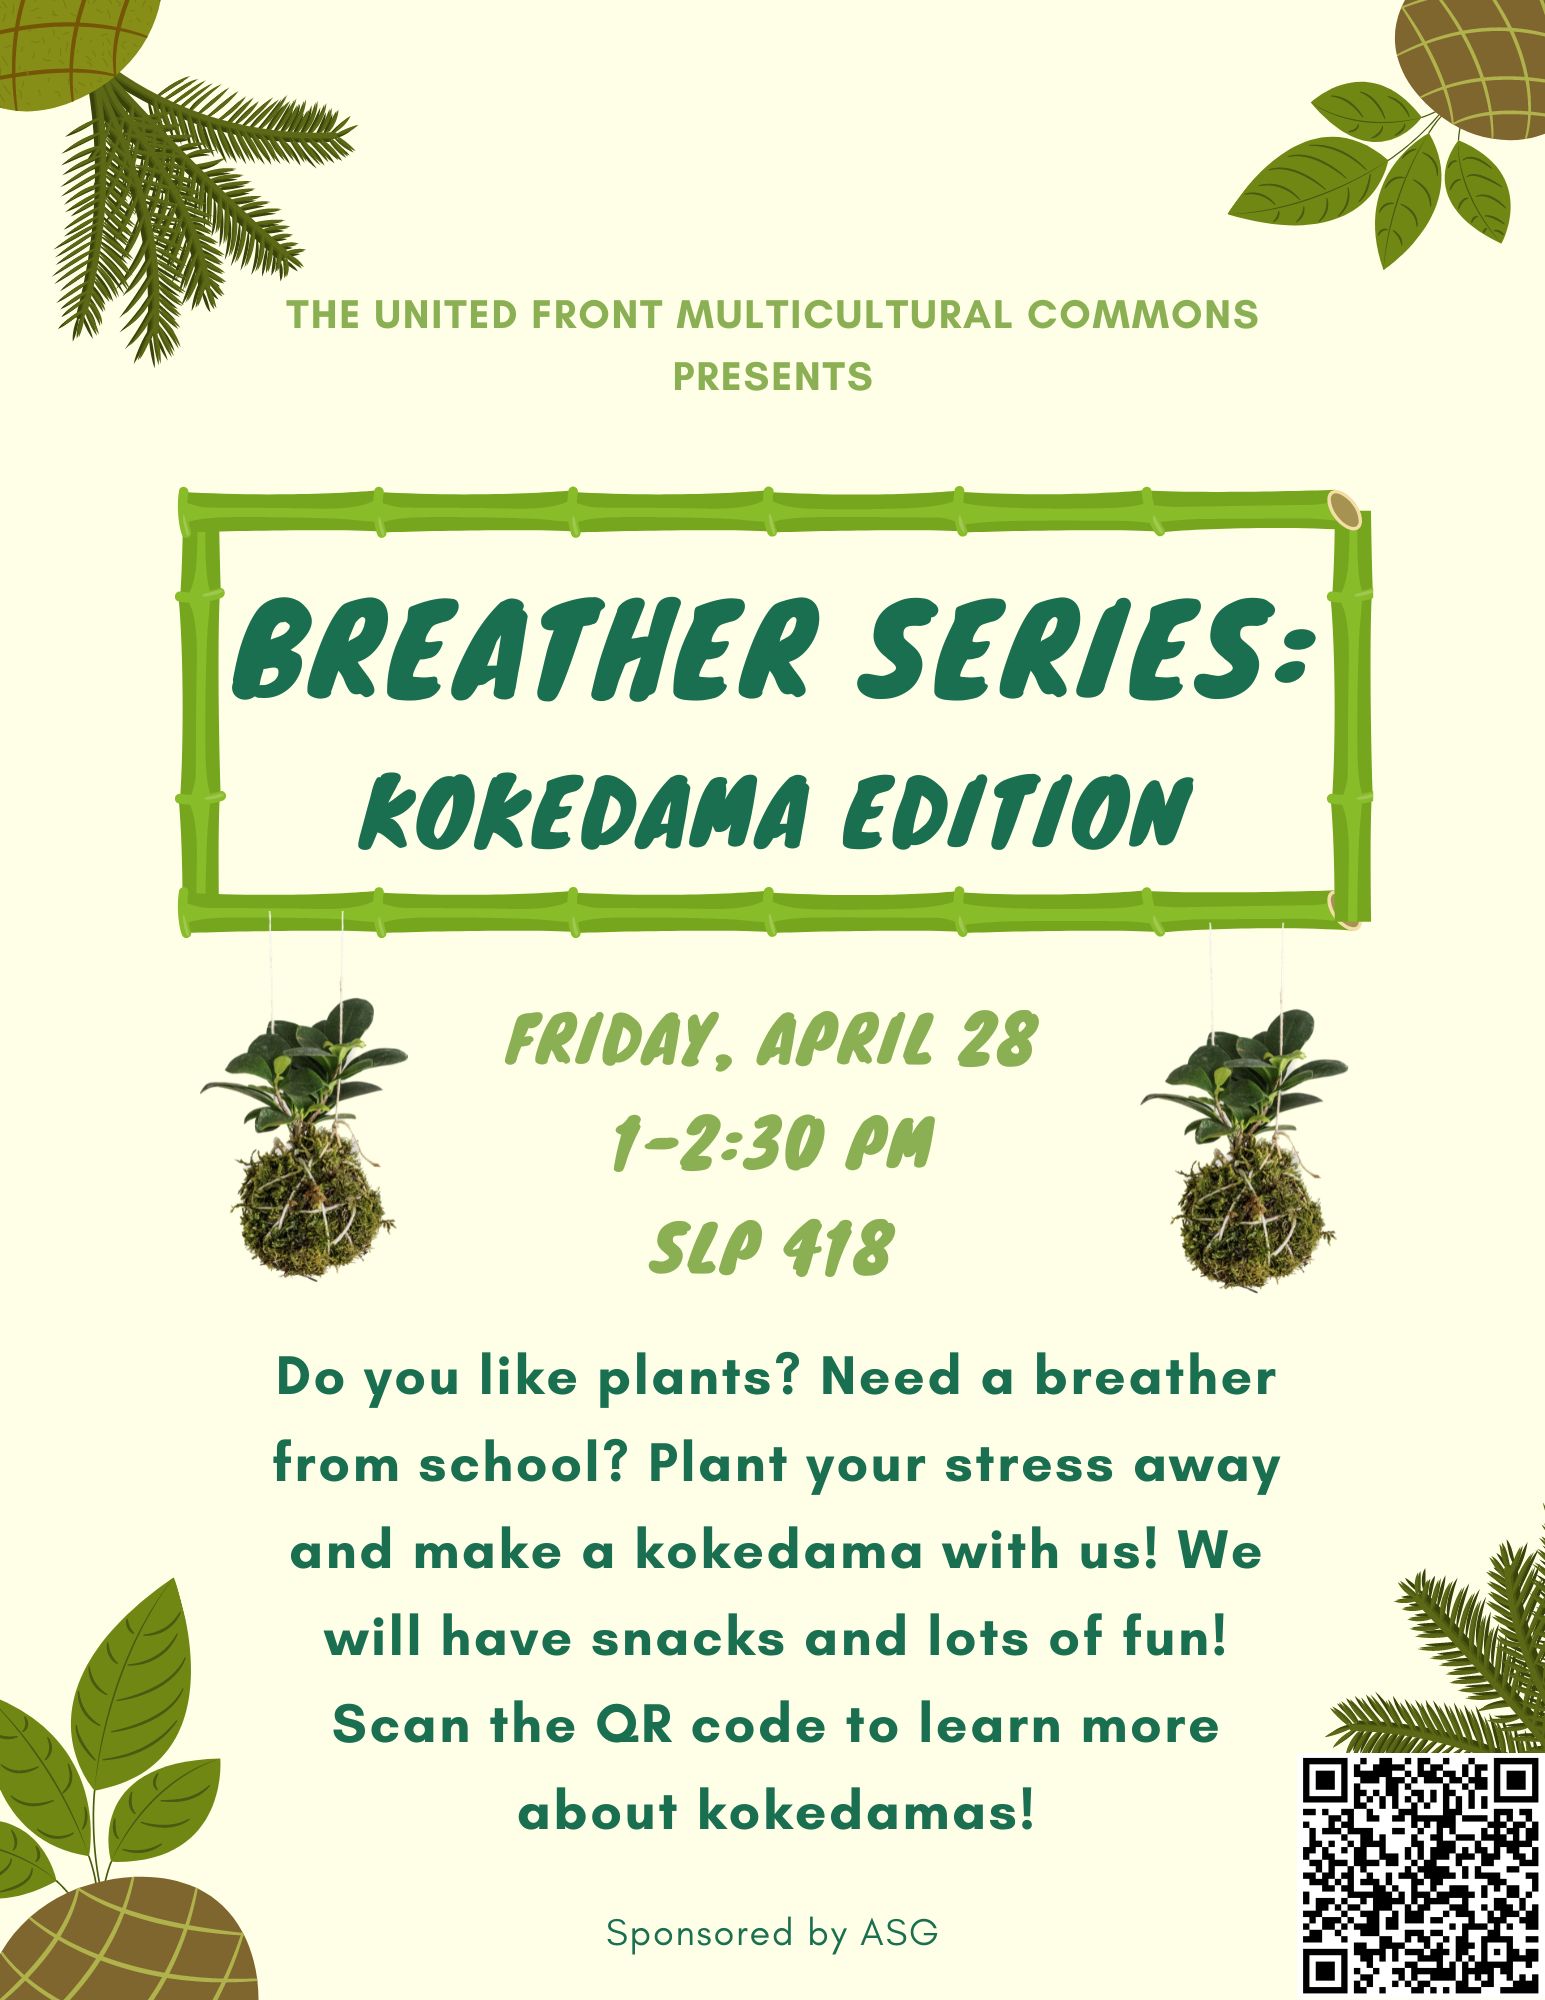 Plant your stress away and make a kokedama with us!